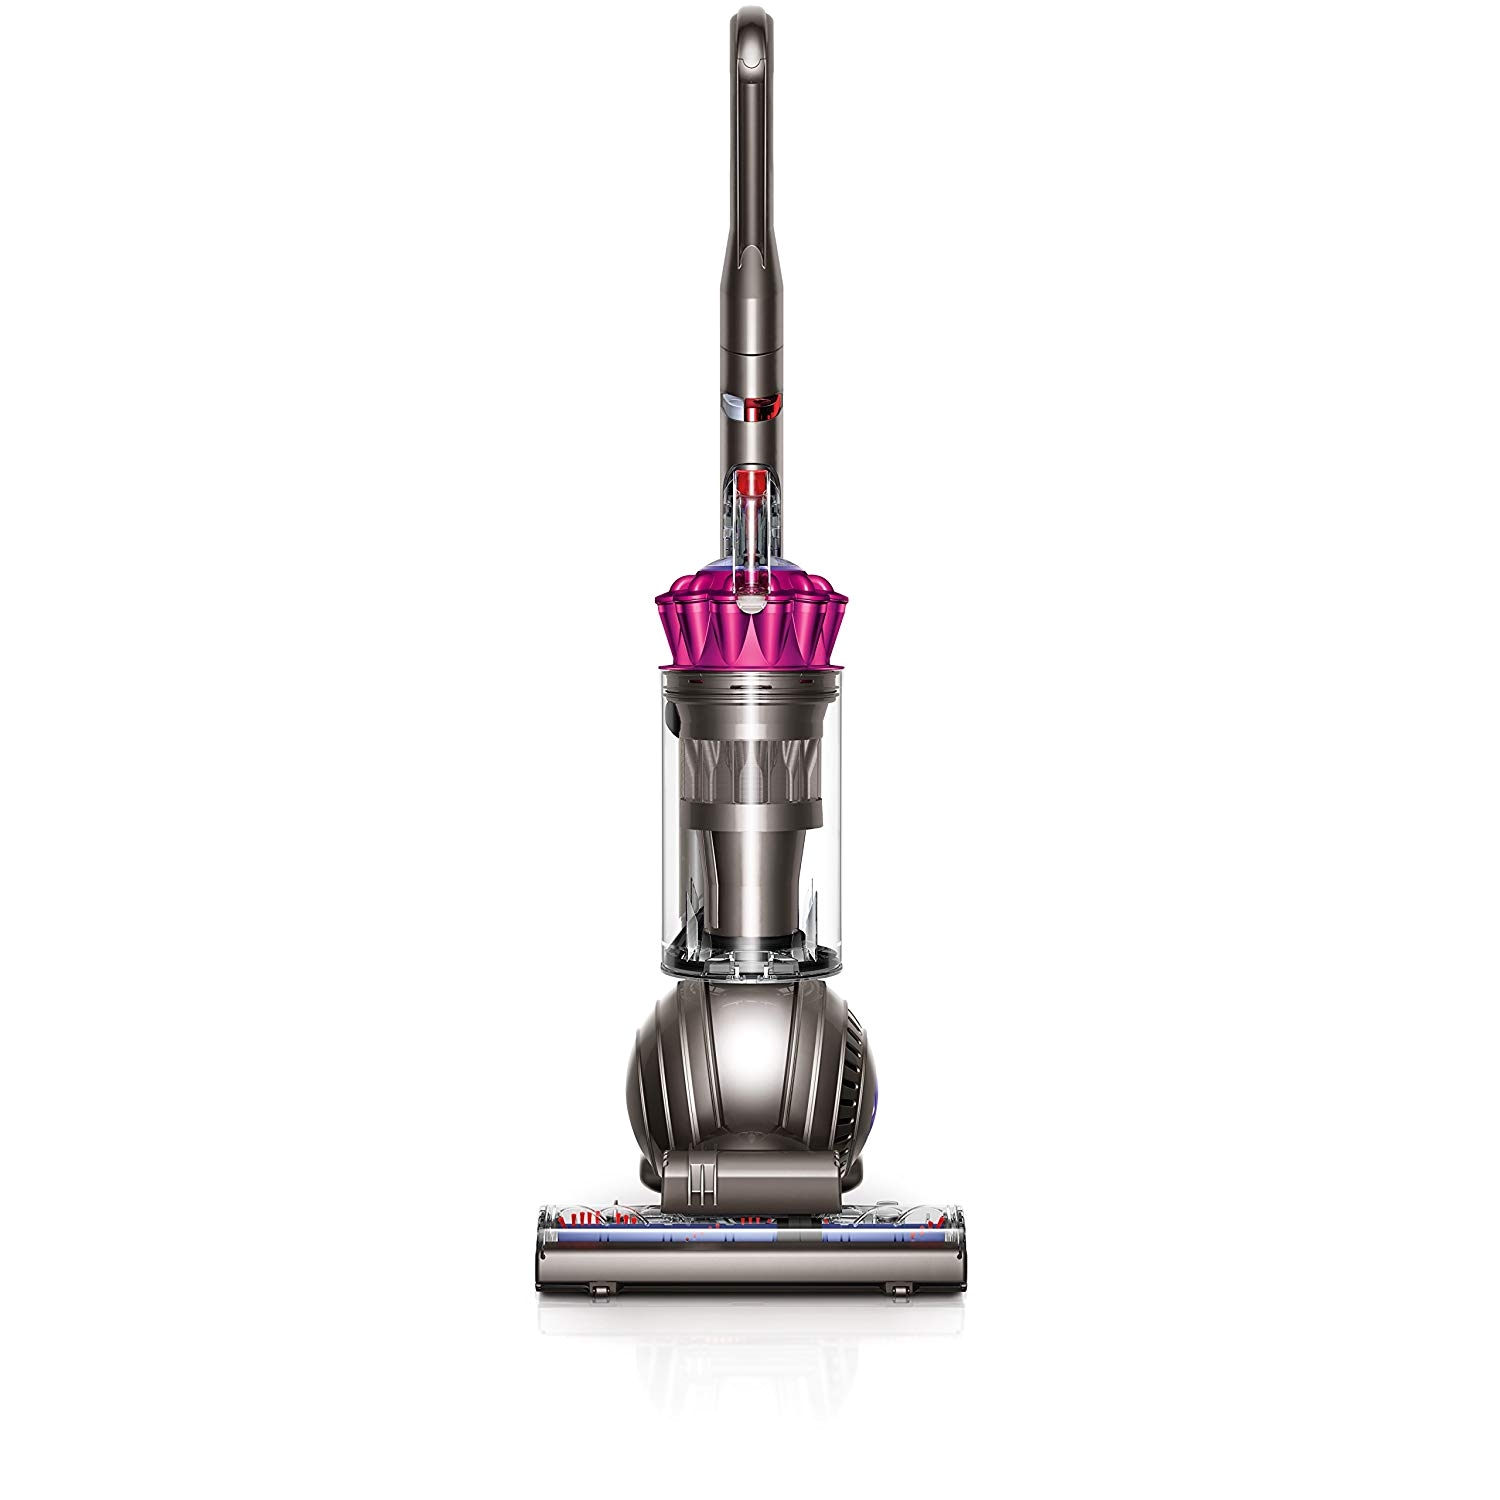 amazon com dyson dc65 animal complete upright vacuum cleaner home kitchen